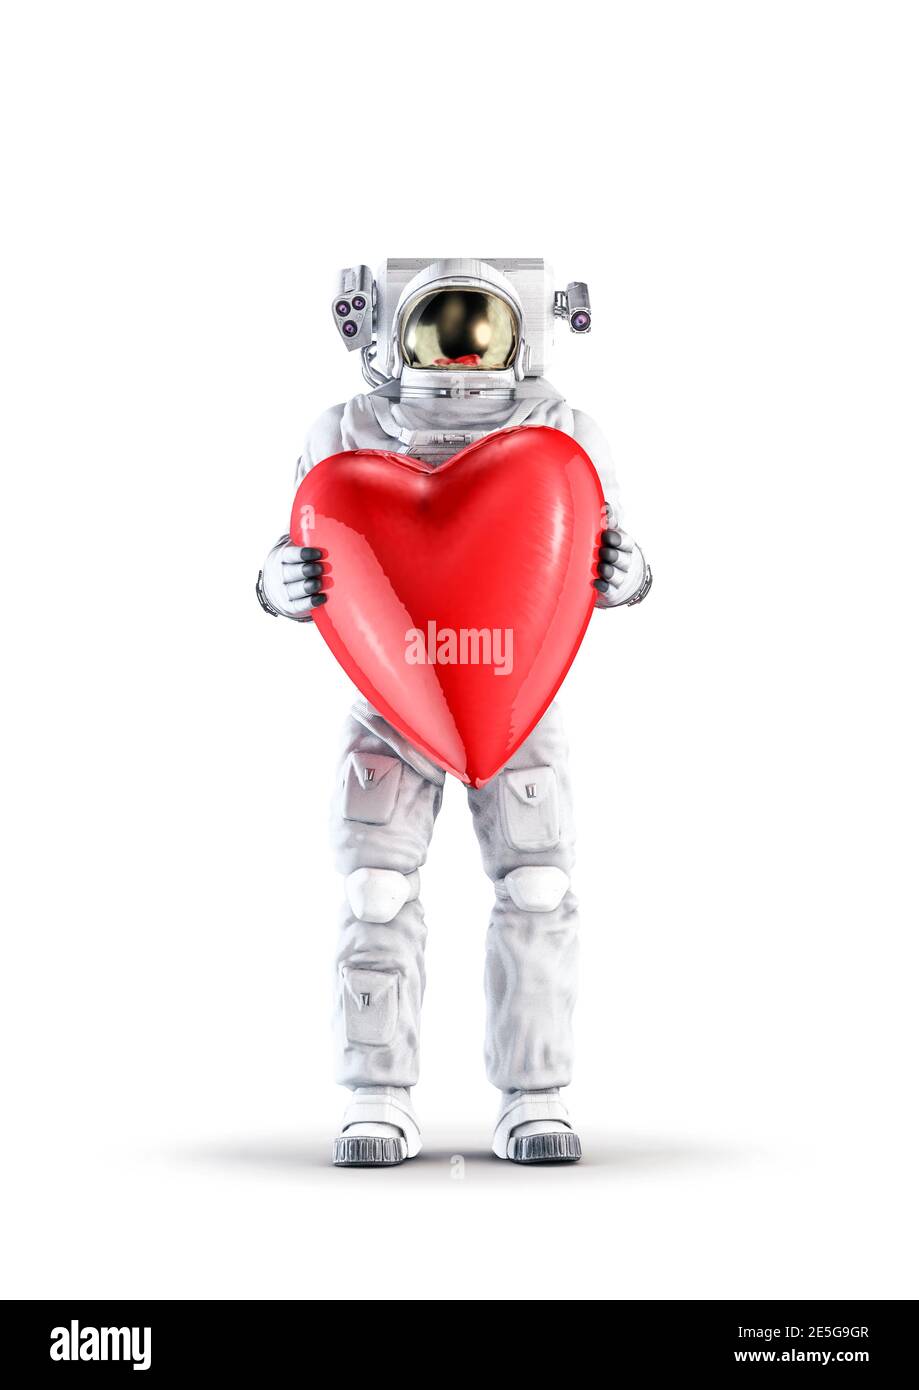 Astronaut with Valentine heart / 3D illustration of space suit wearing male figure holding large red Valentine's Day heart isolated on white studio ba Stock Photo